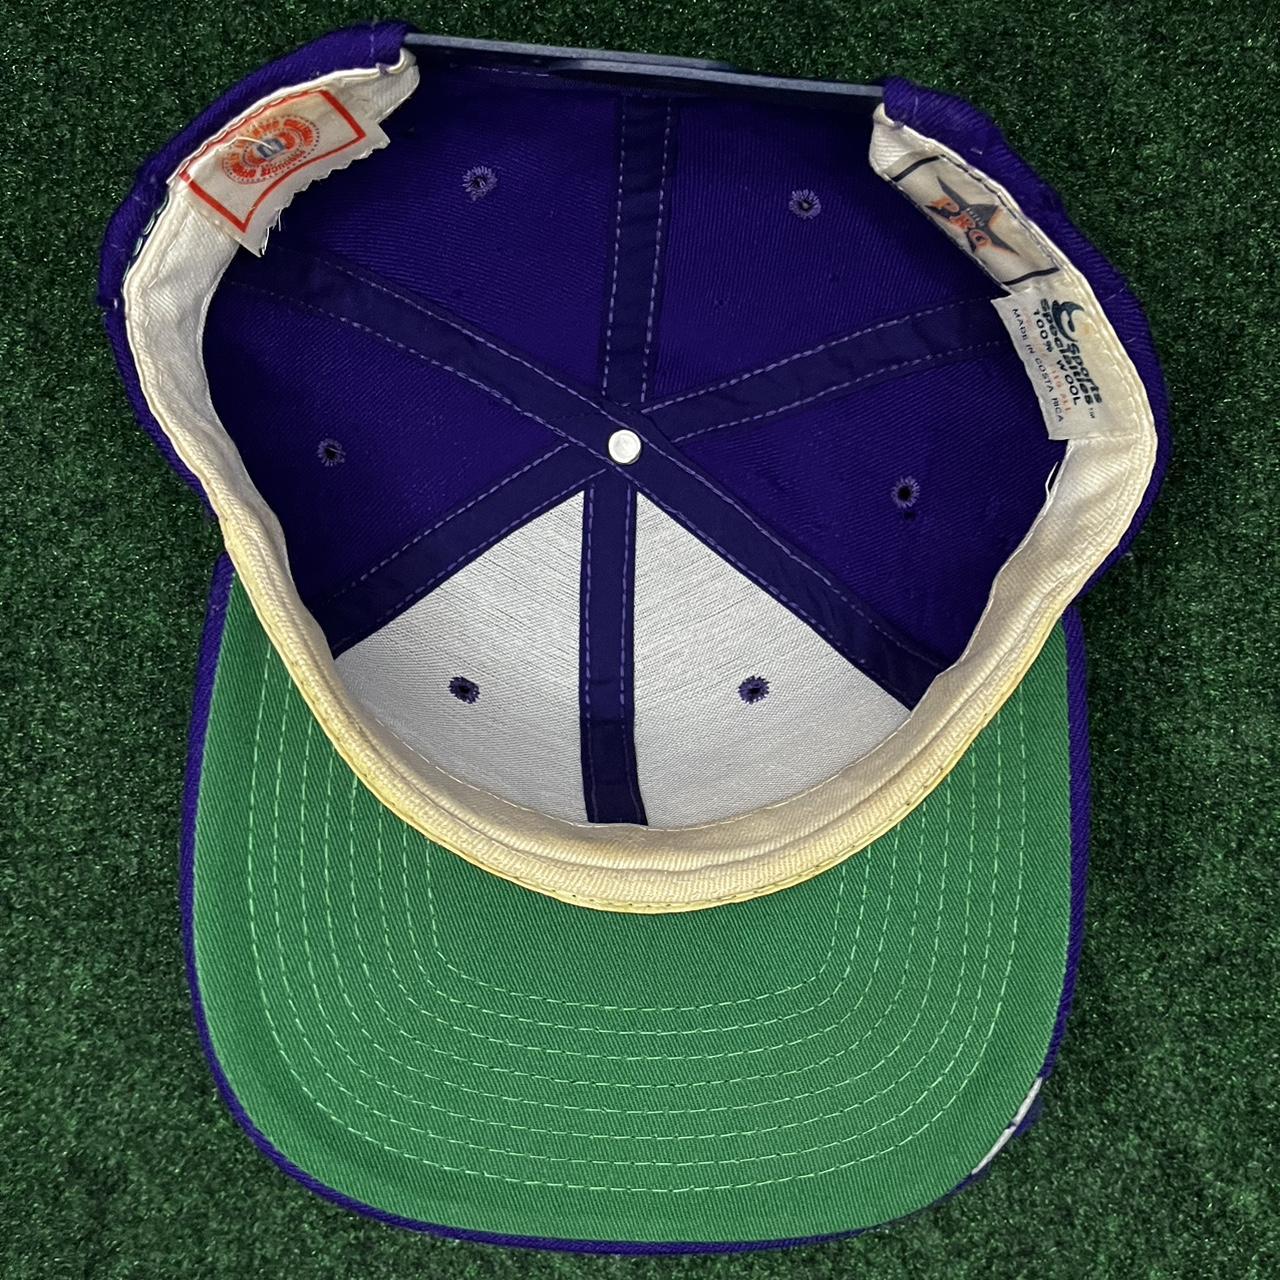 Sports Specialties Men's Purple and White Hat (3)